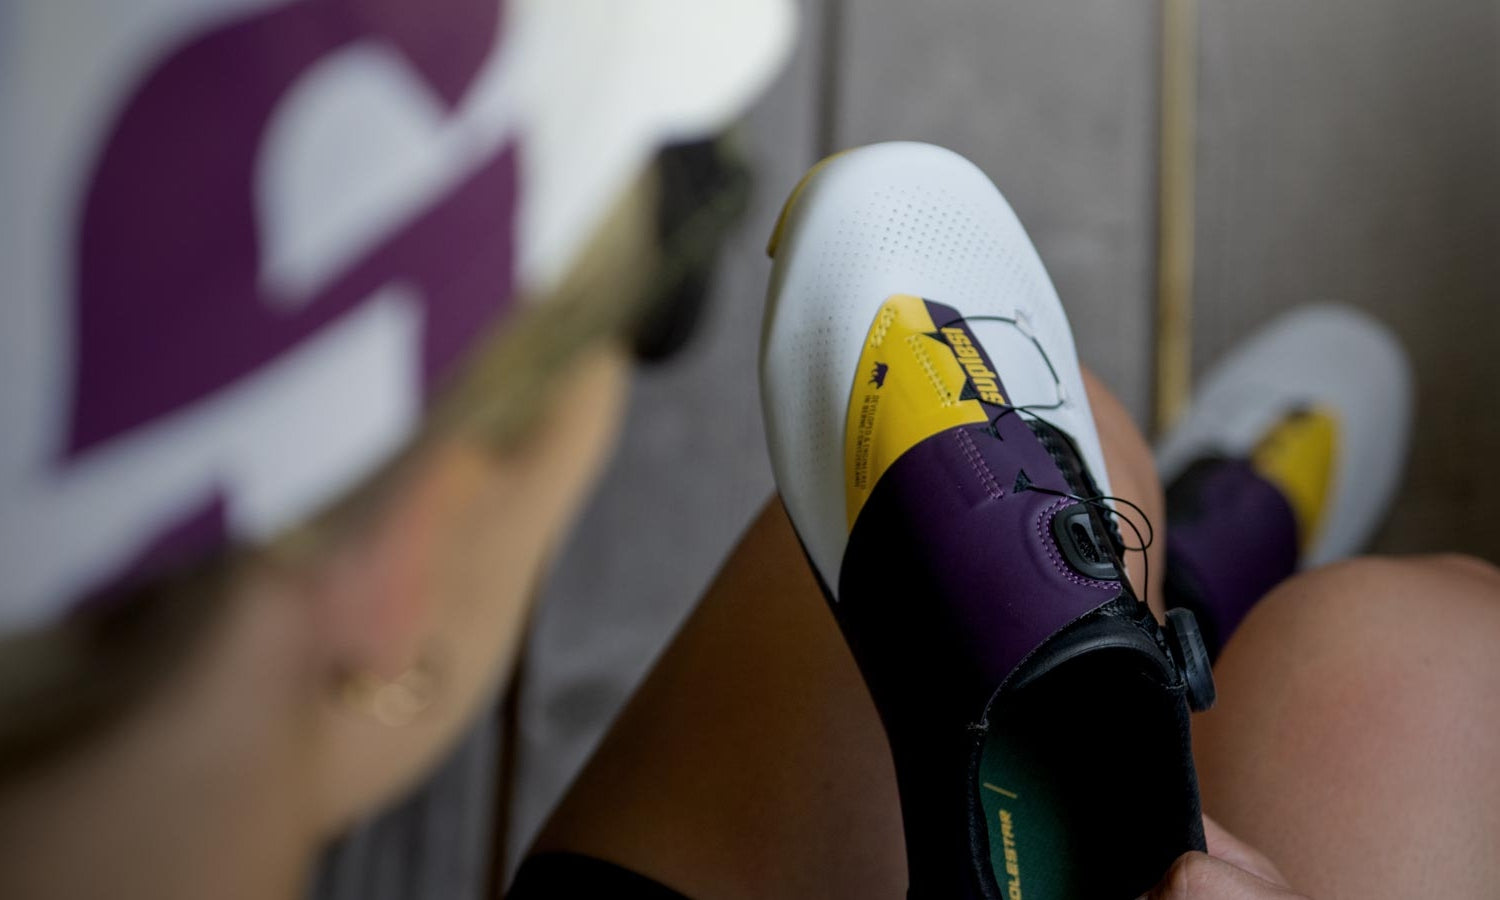 Suplest Cycling Shoes: Overview and Fit Guide